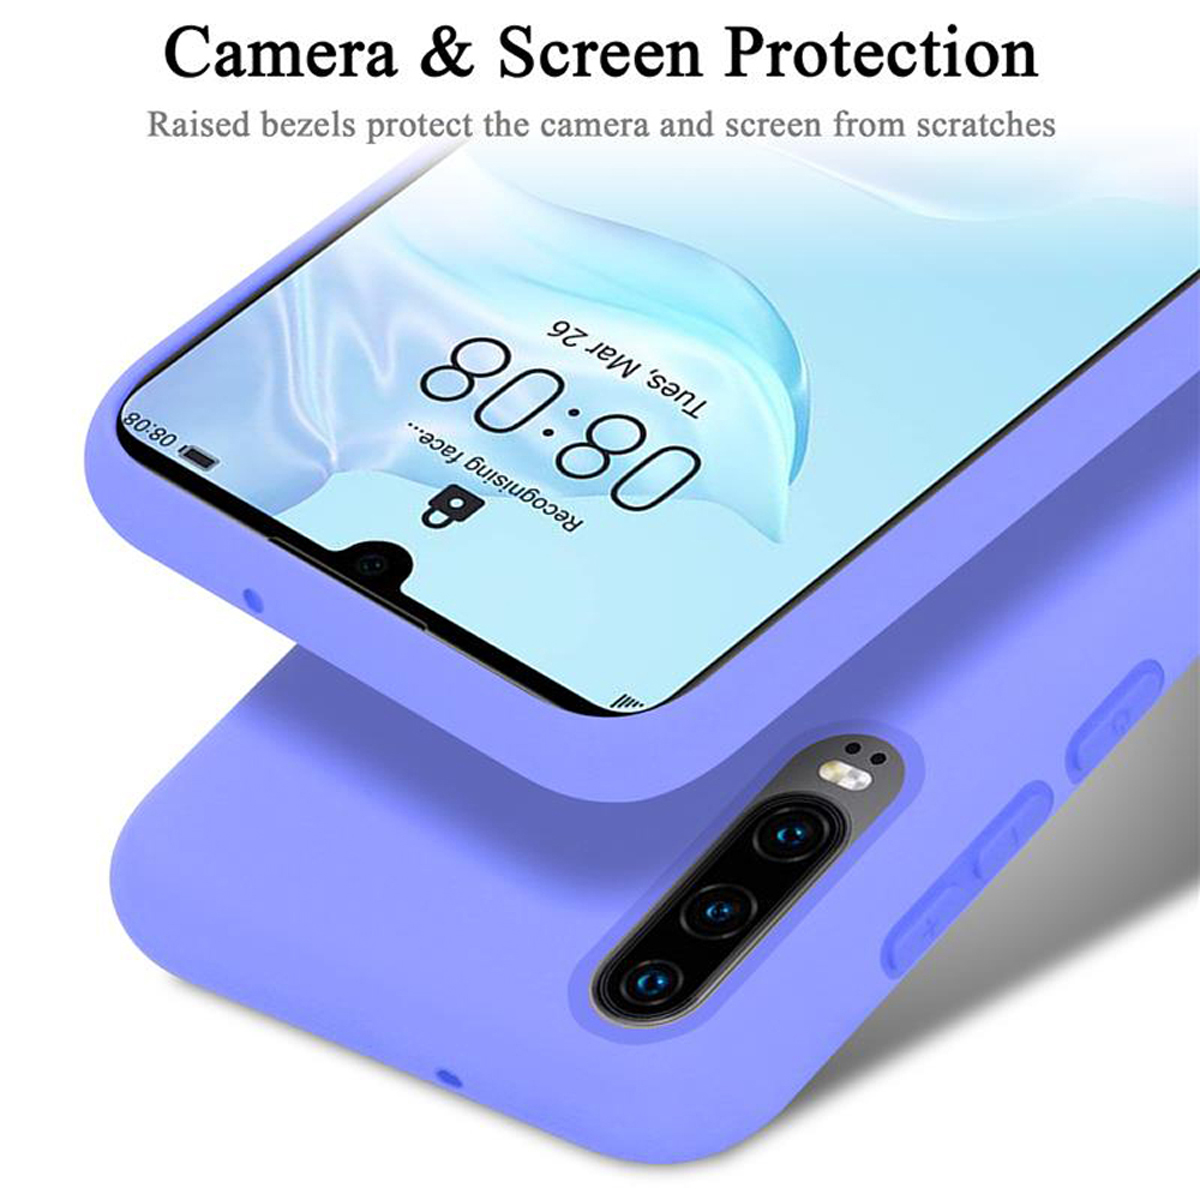 Hülle Huawei, Liquid Backcover, Silicone Case HELL im LILA LIQUID Style, P30, CADORABO